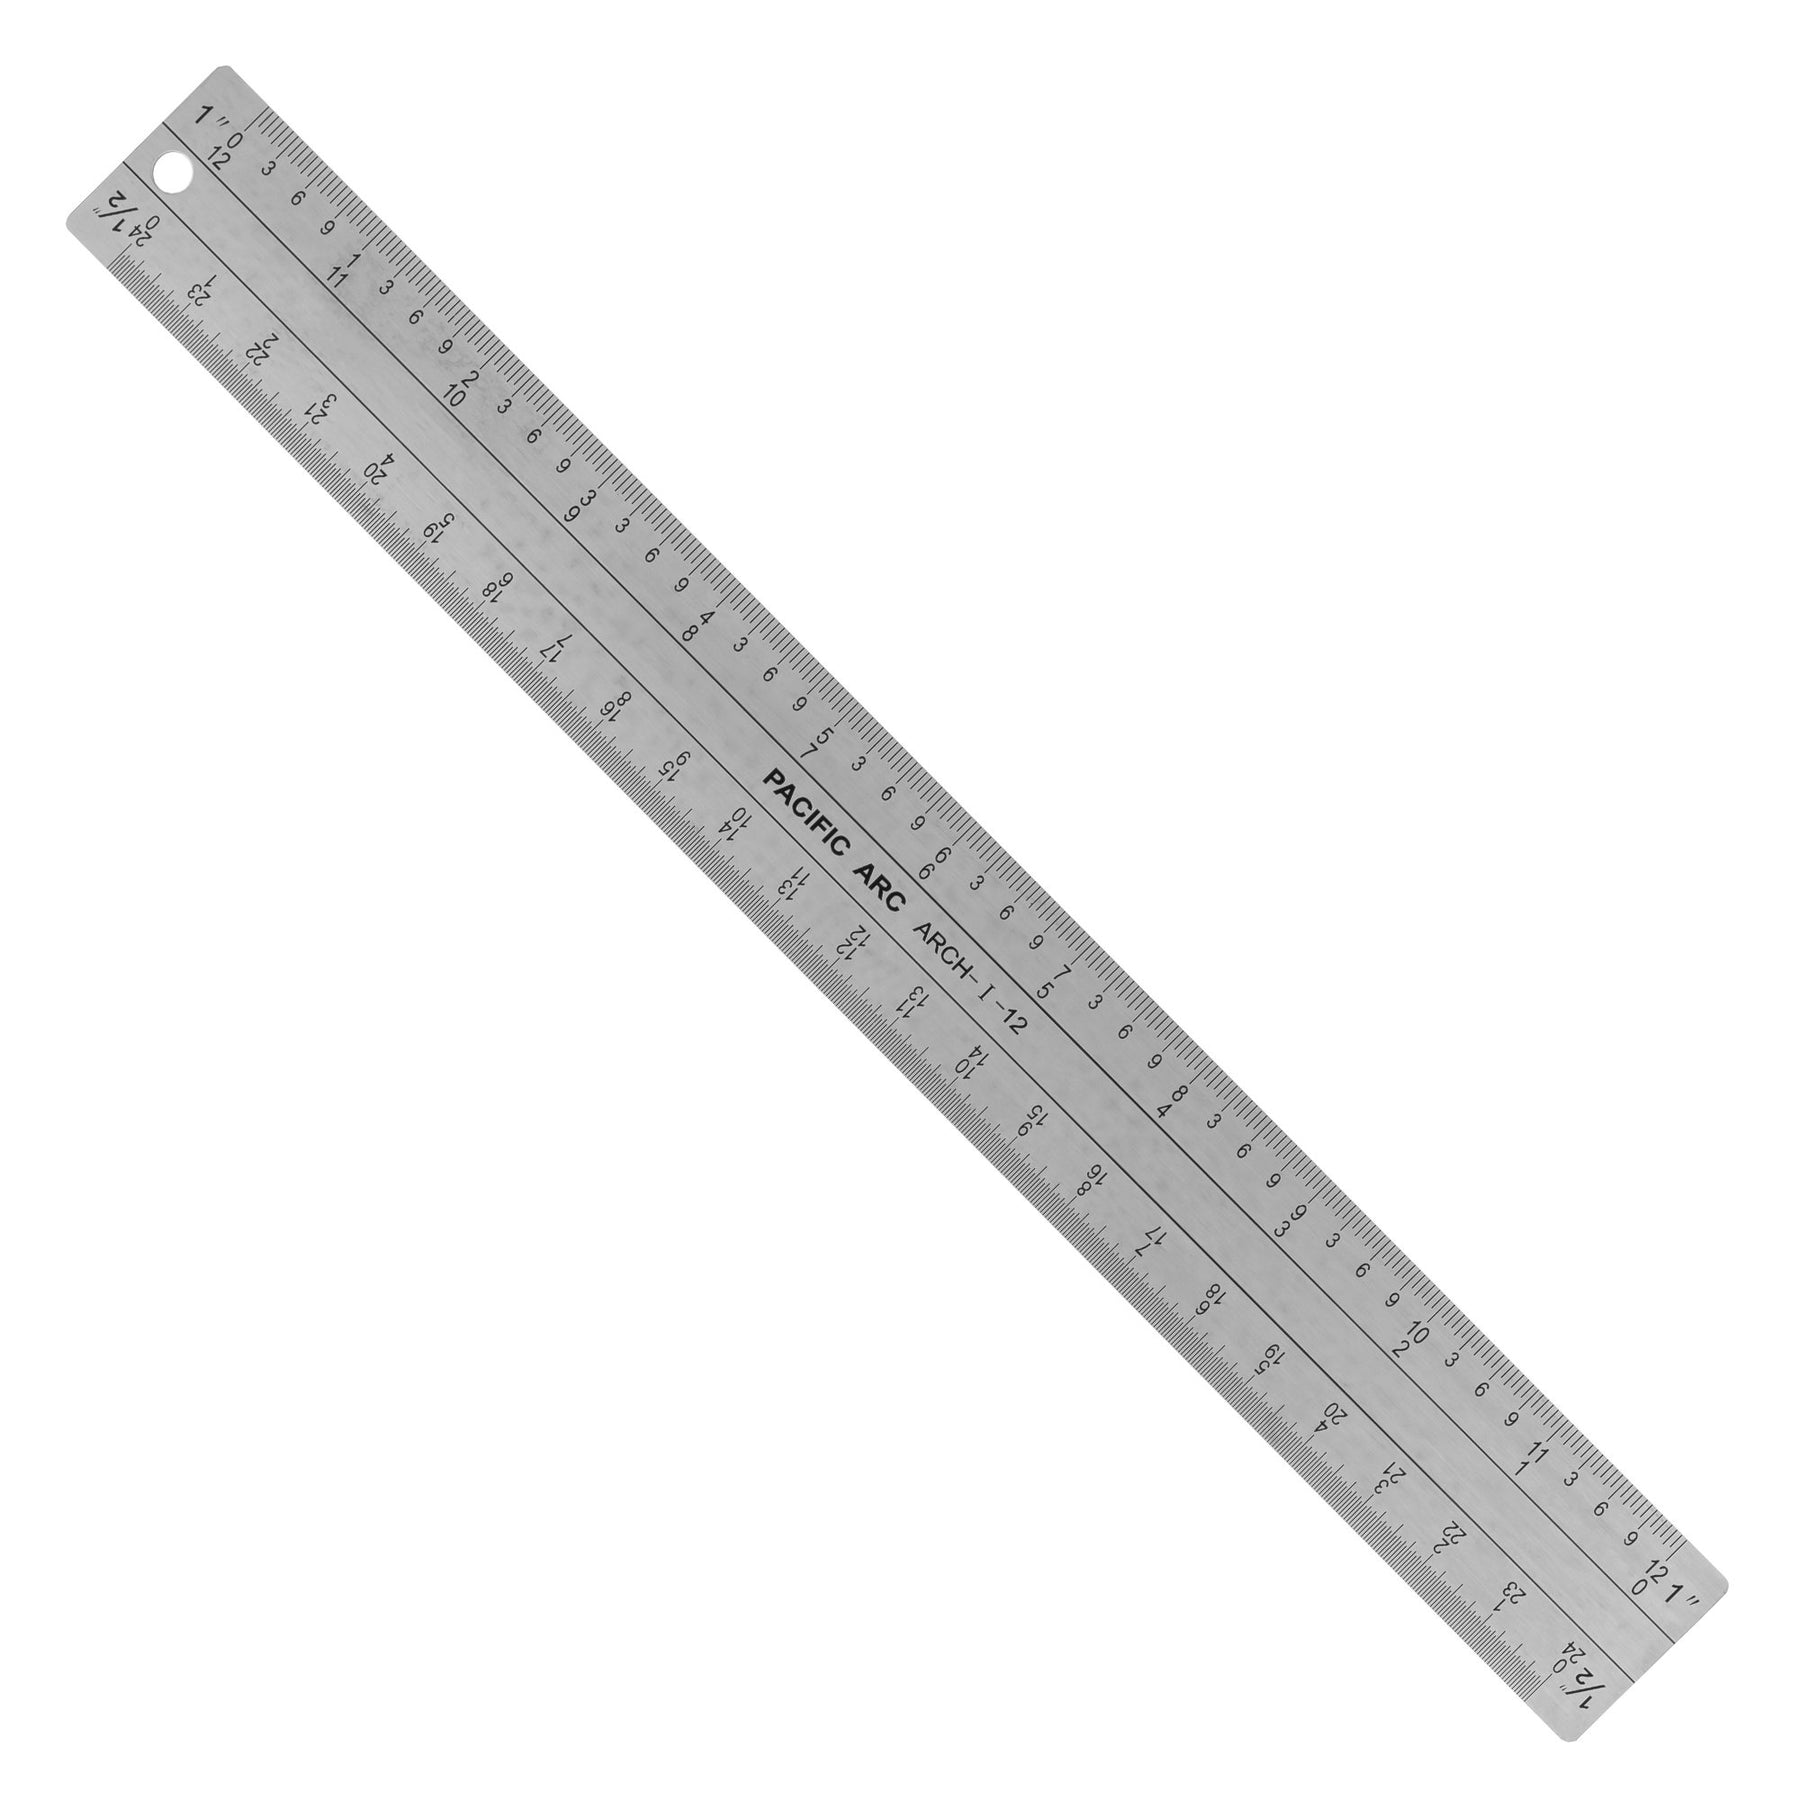 Realistic Various Brushed Metal Rulers With Measurement Scale And